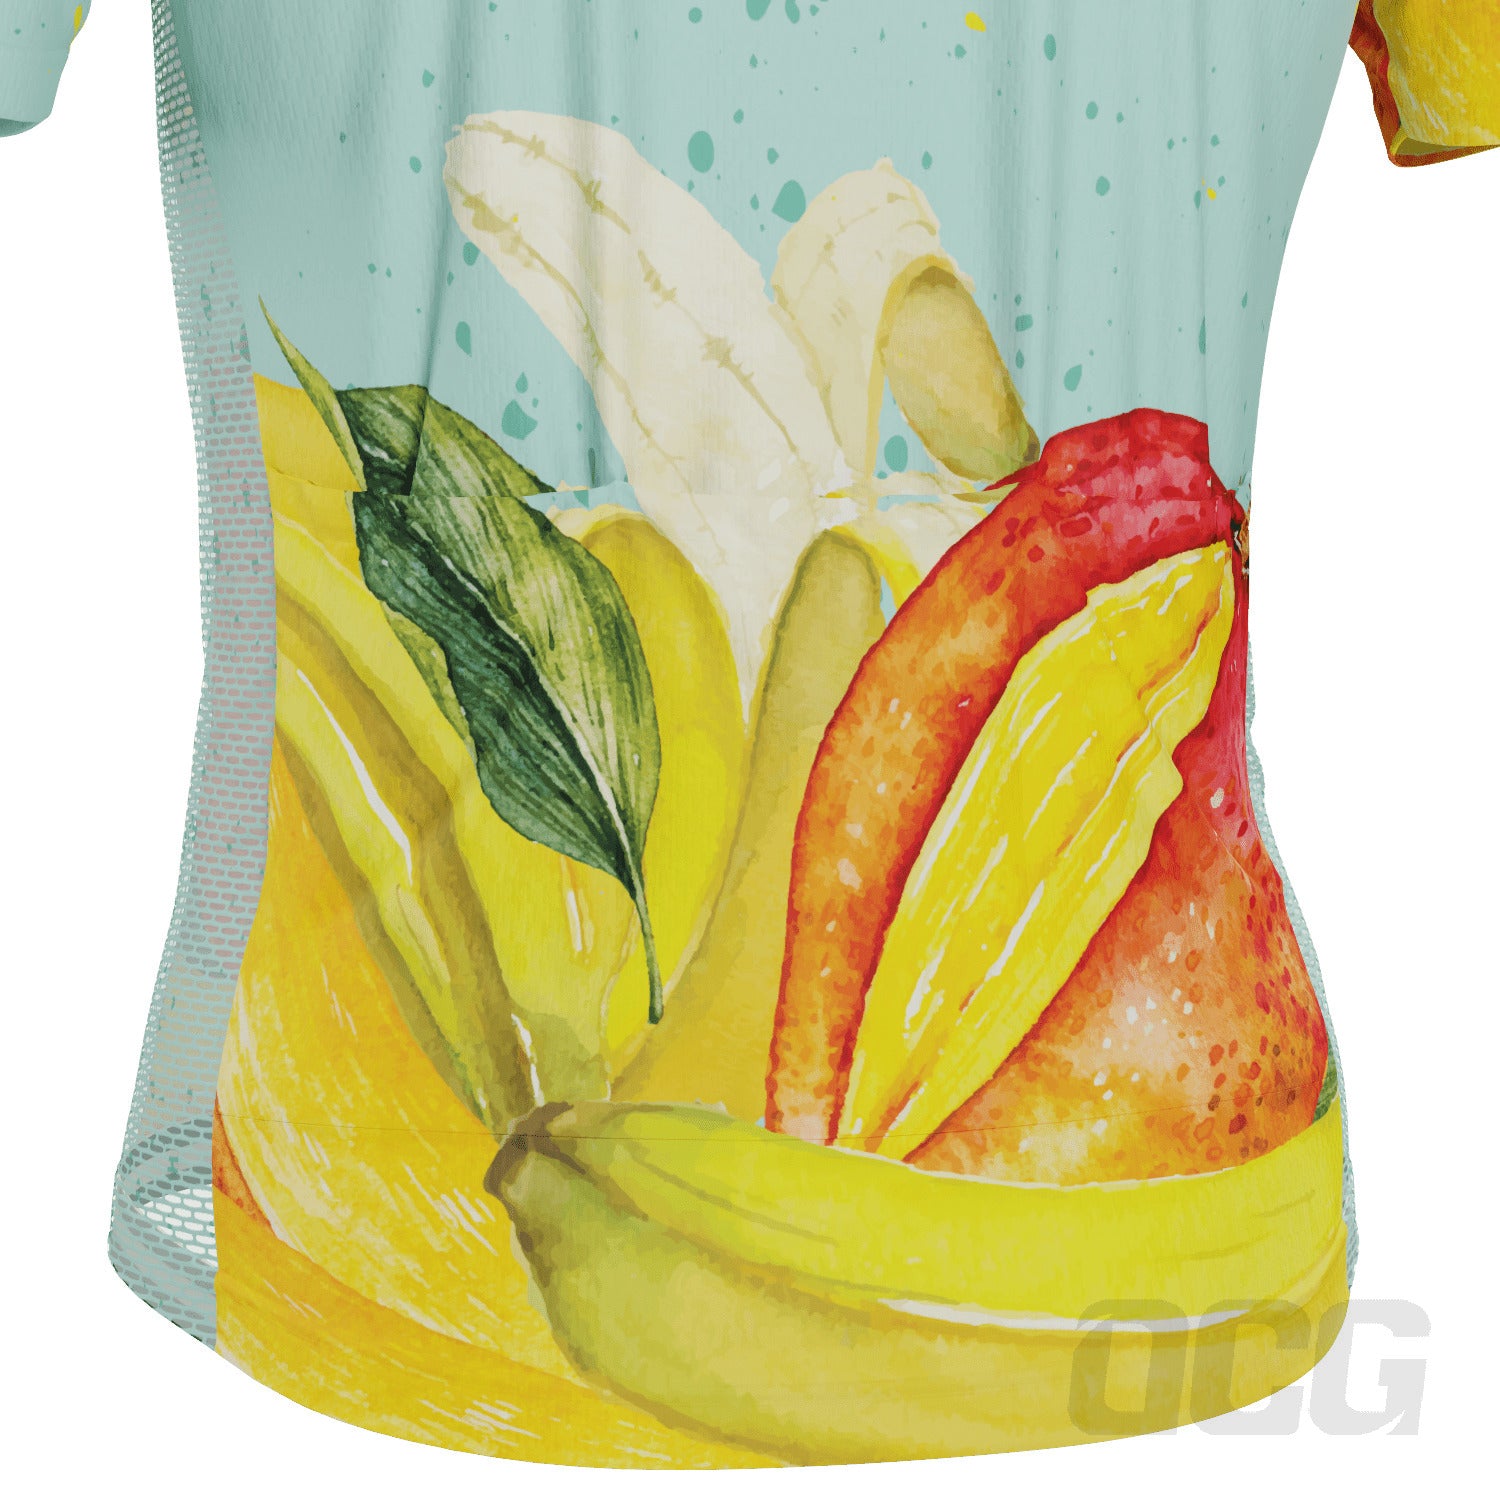 Men's It Takes Two To Mango Short Sleeve Cycling Jersey